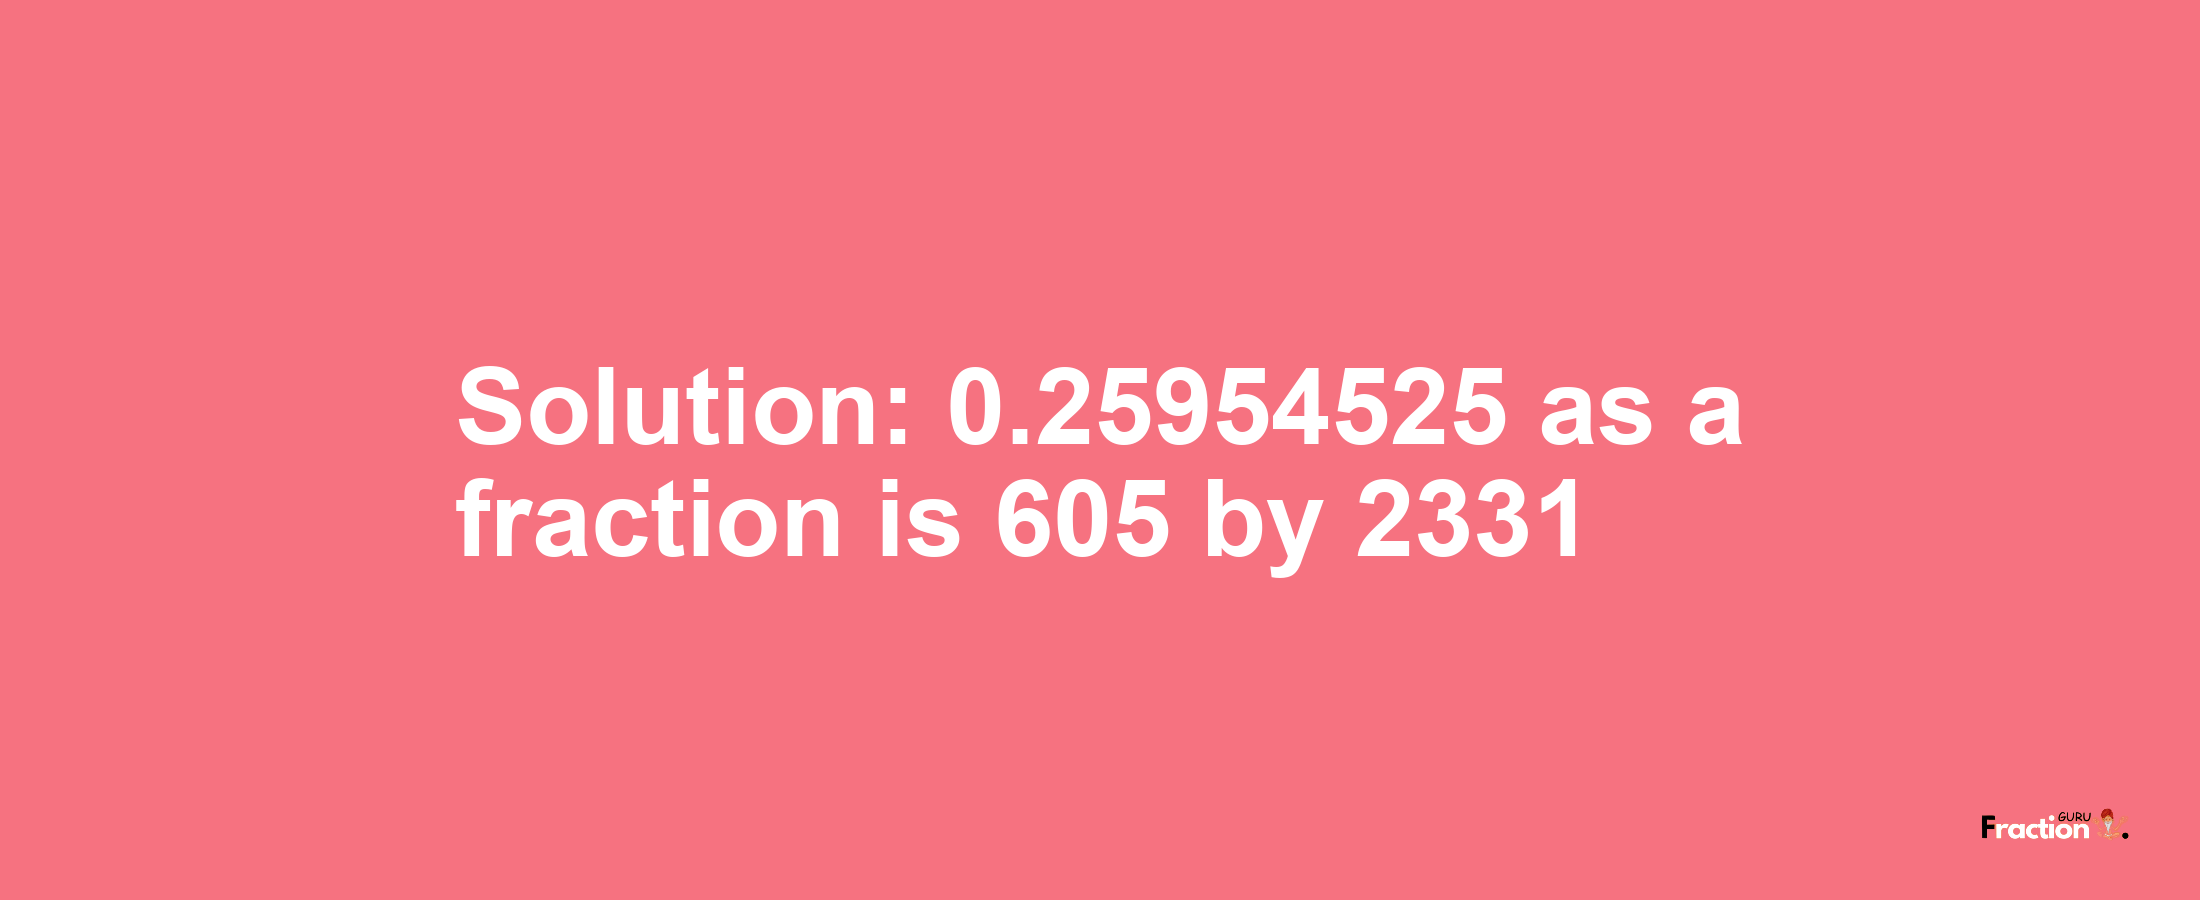 Solution:0.25954525 as a fraction is 605/2331